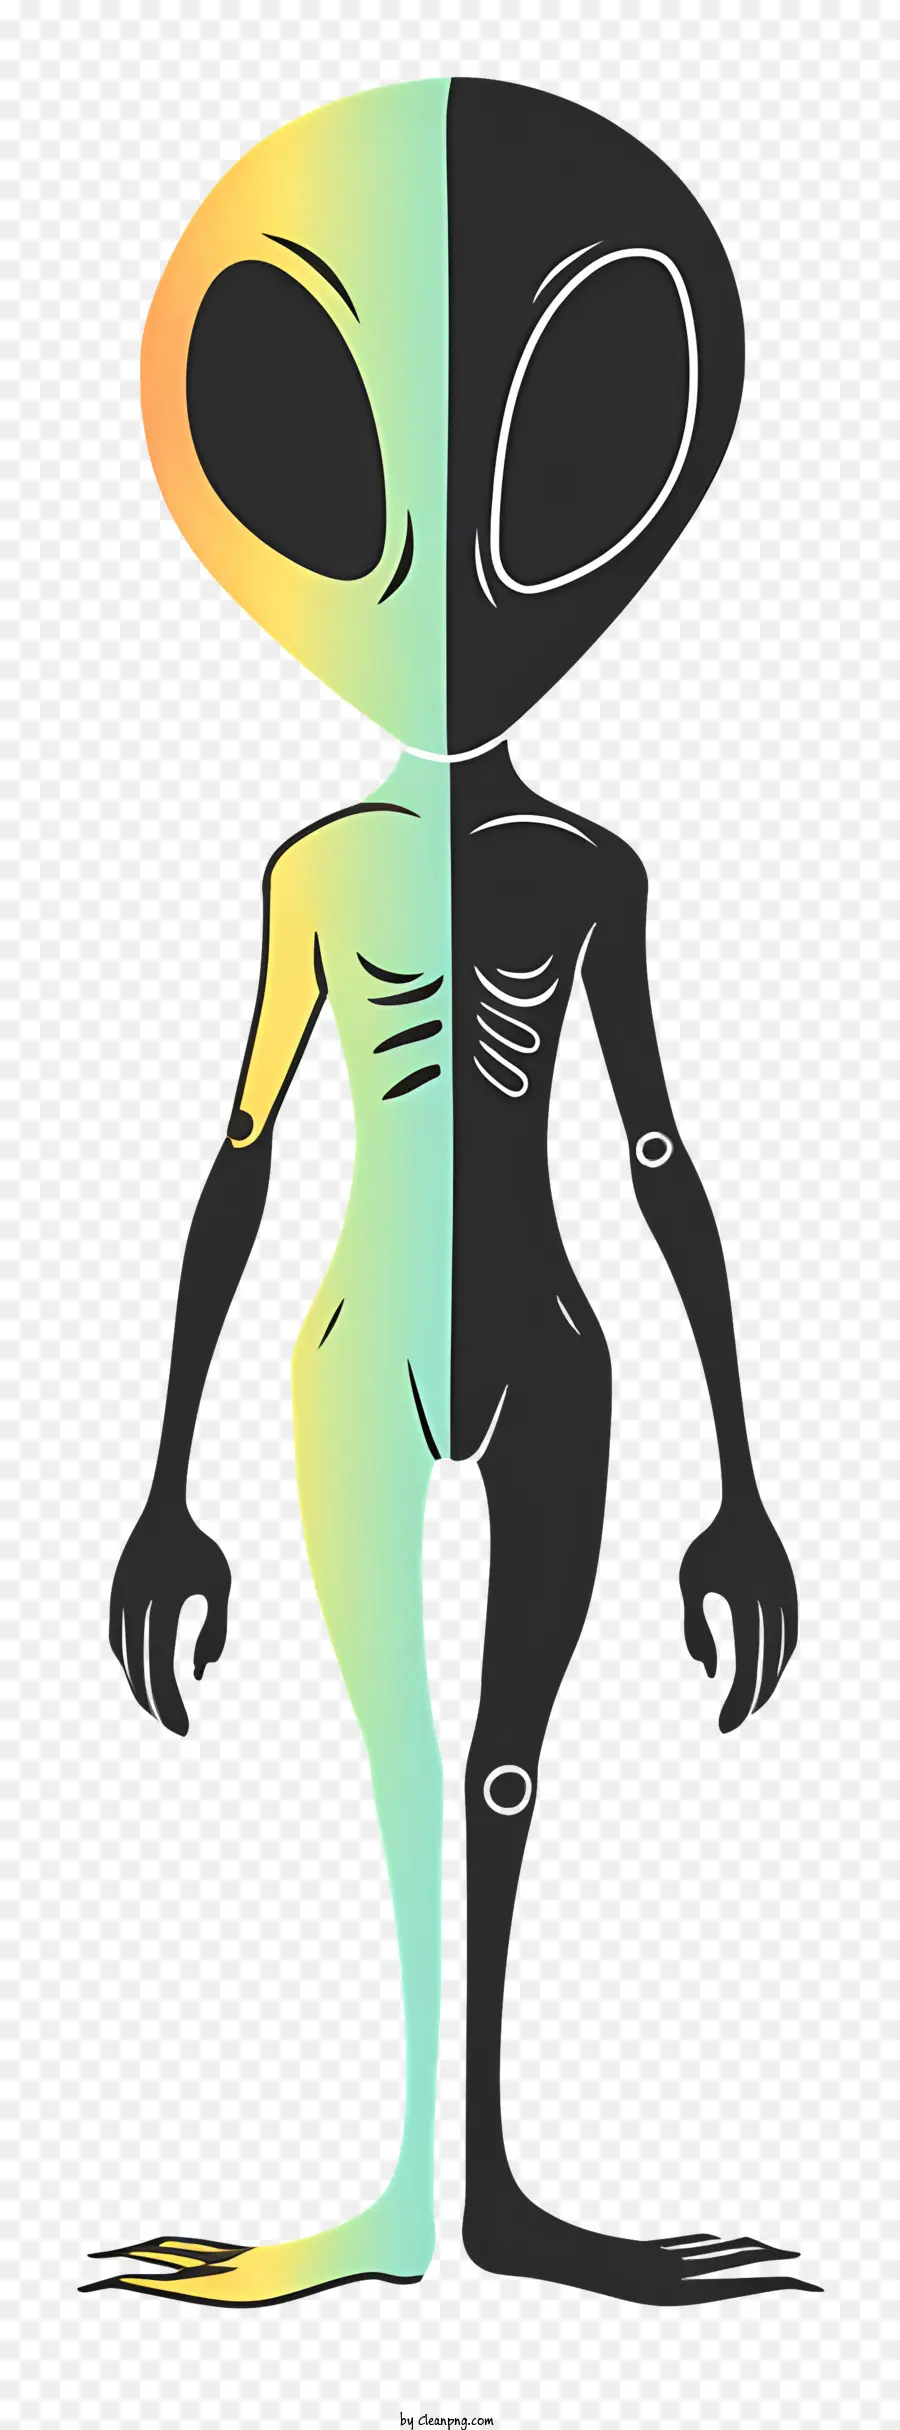 alien hominid alien character large head long arms and legs small torso